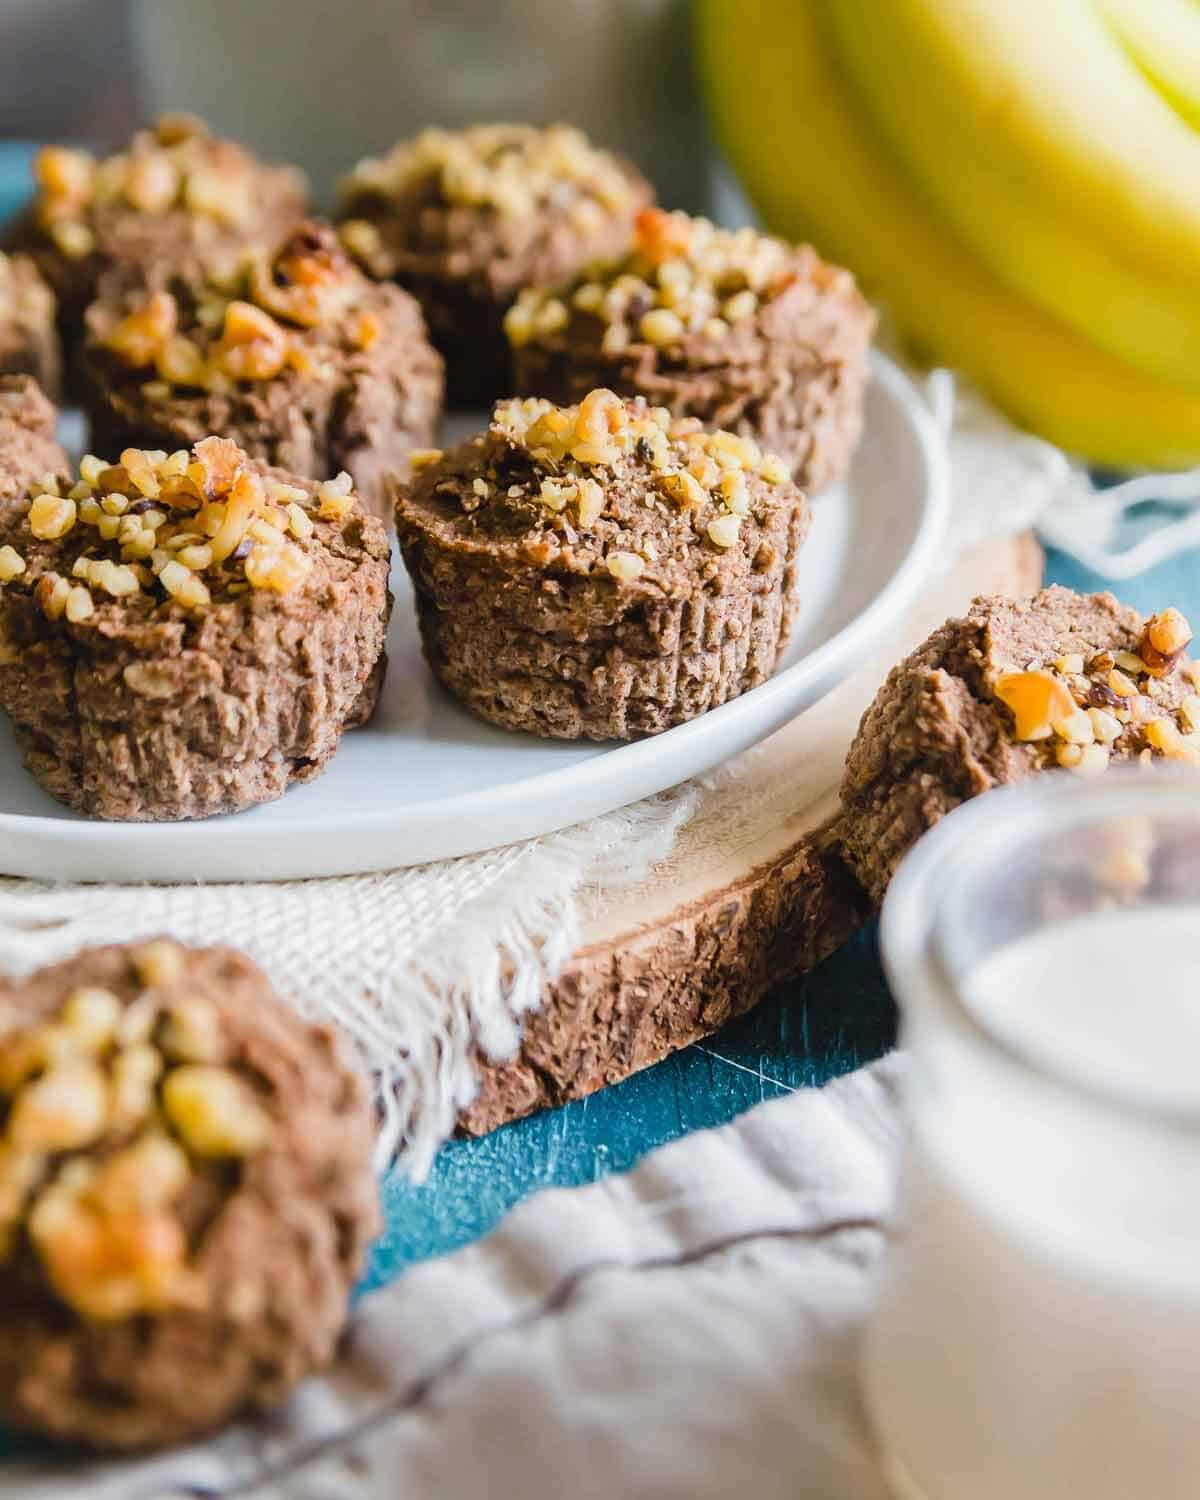 Banana nut muffins using leftover almond pulp as an ingredient